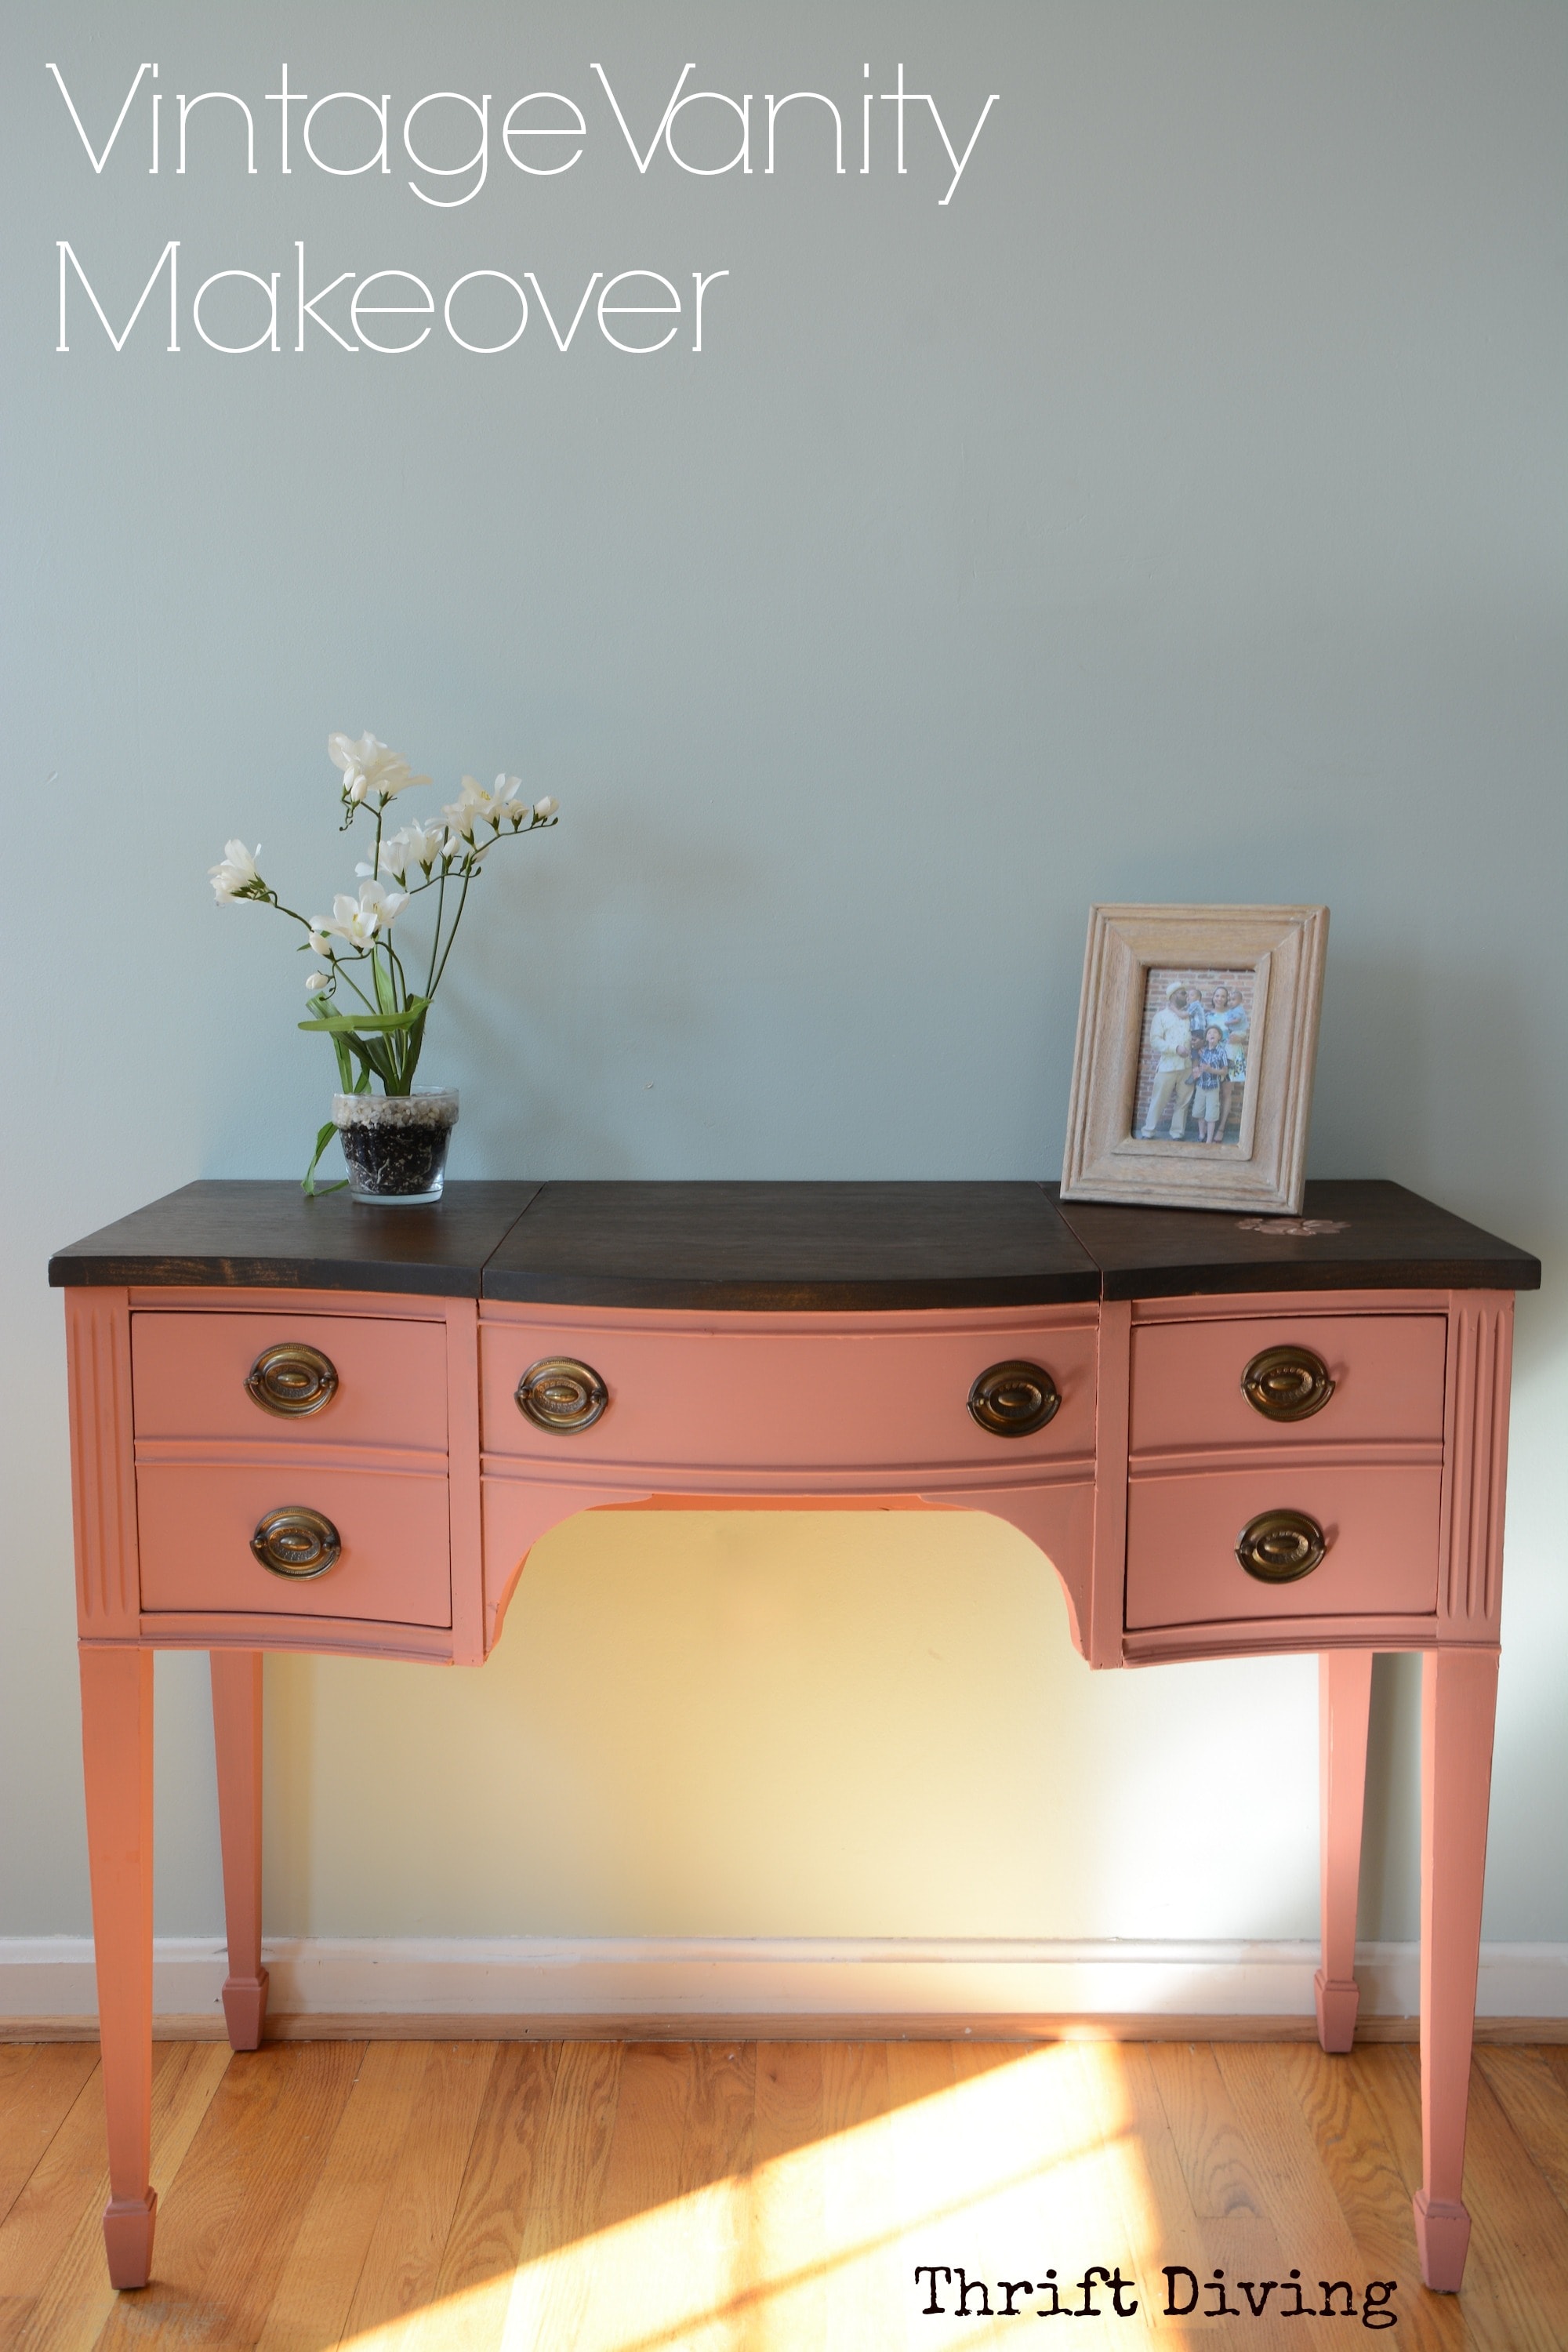 BEFORE and AFTER: The Makeover of a Vintage Vanity